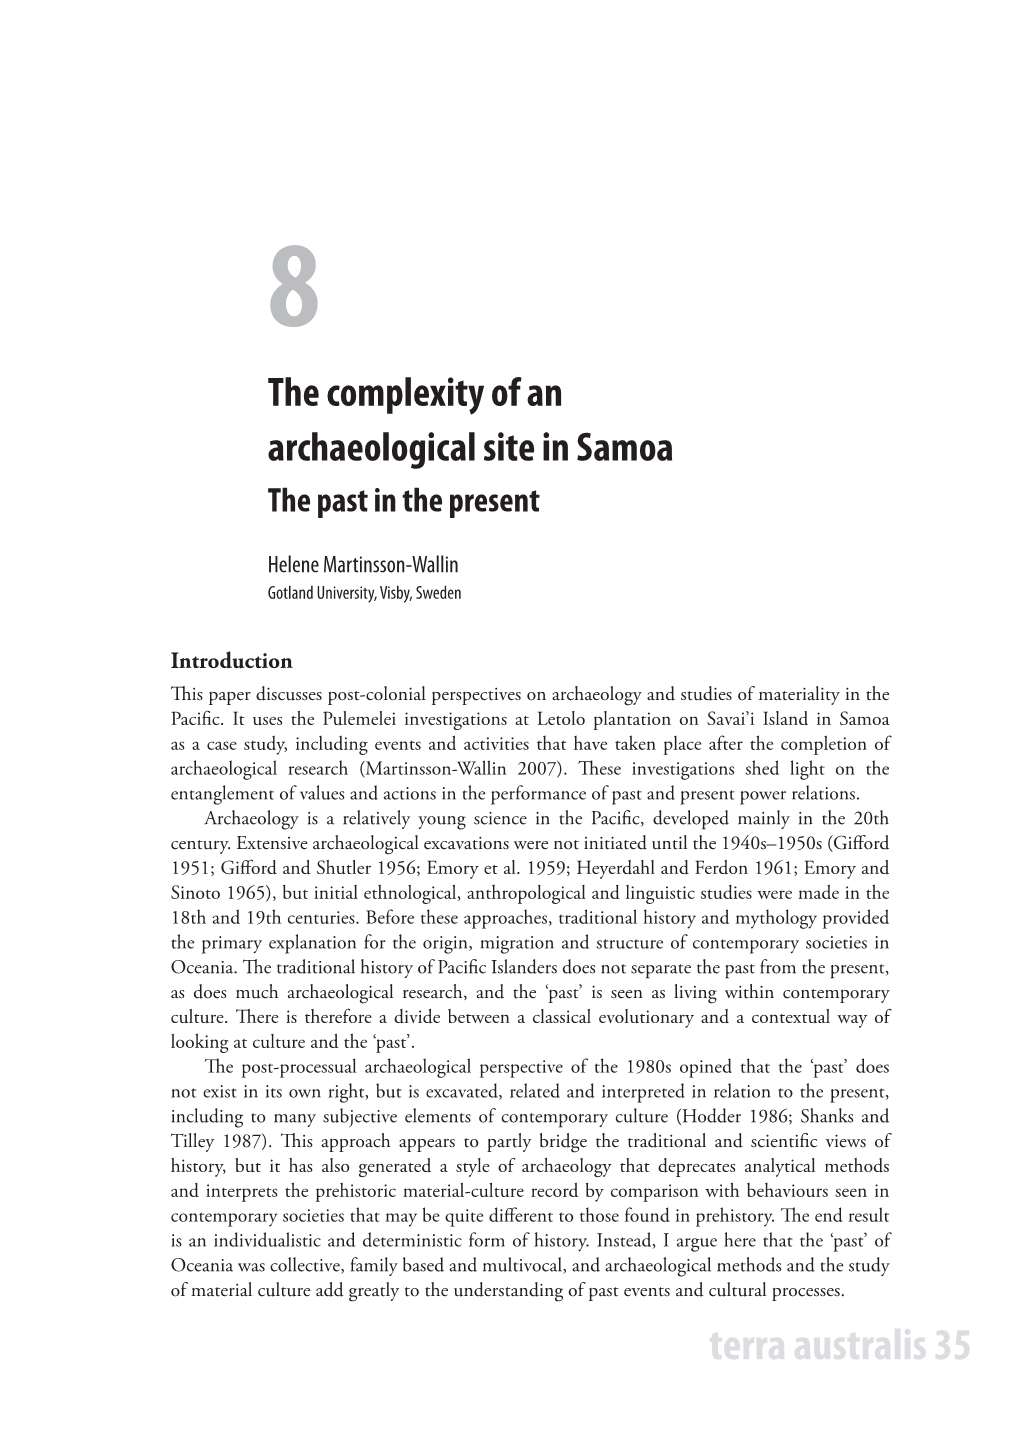 The Complexity of an Archaeological Site in Samoa the Past in the Present